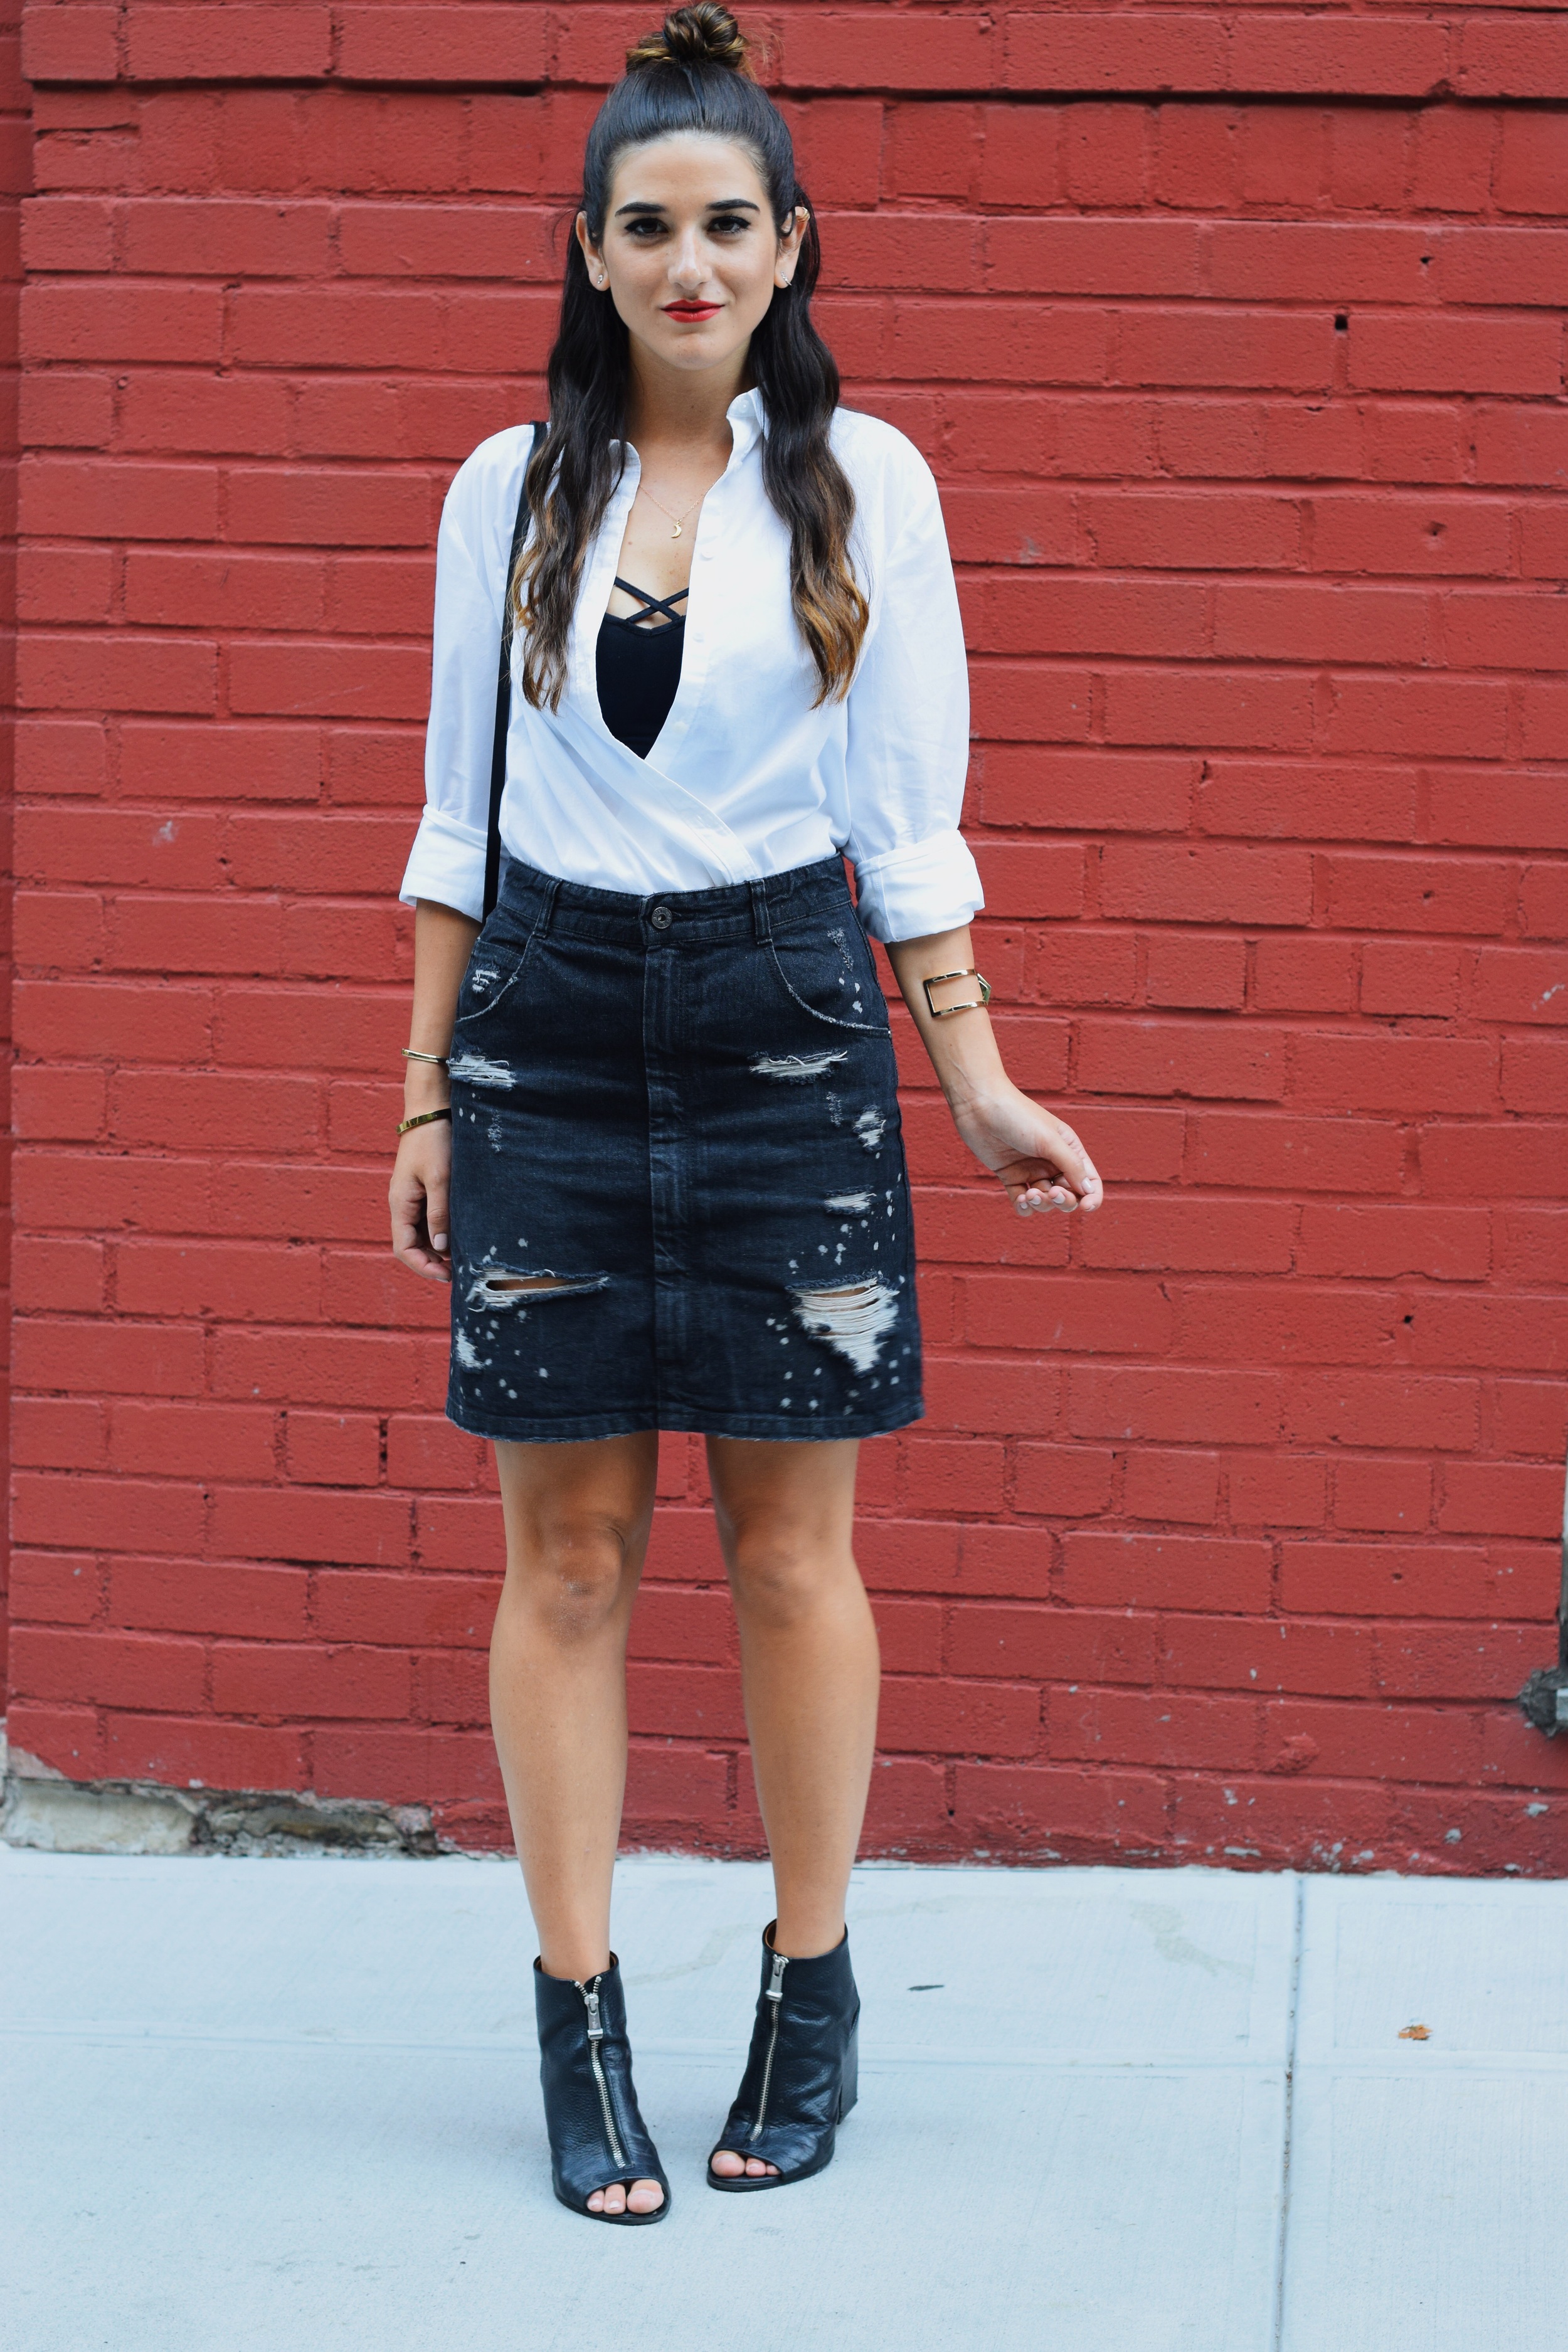 Coco & Marie Moon Necklace Giveaway Louboutins & Love Fashion Blog Esther Santer NYC Street Style Blogger Lifestyle Topknot Bun Denim Ripped Jean Skirt White Button Down Zara Black Box Clutch Bag Bralette Nordstrom Booties Gold Jewelry Girl Women Shop.JPG